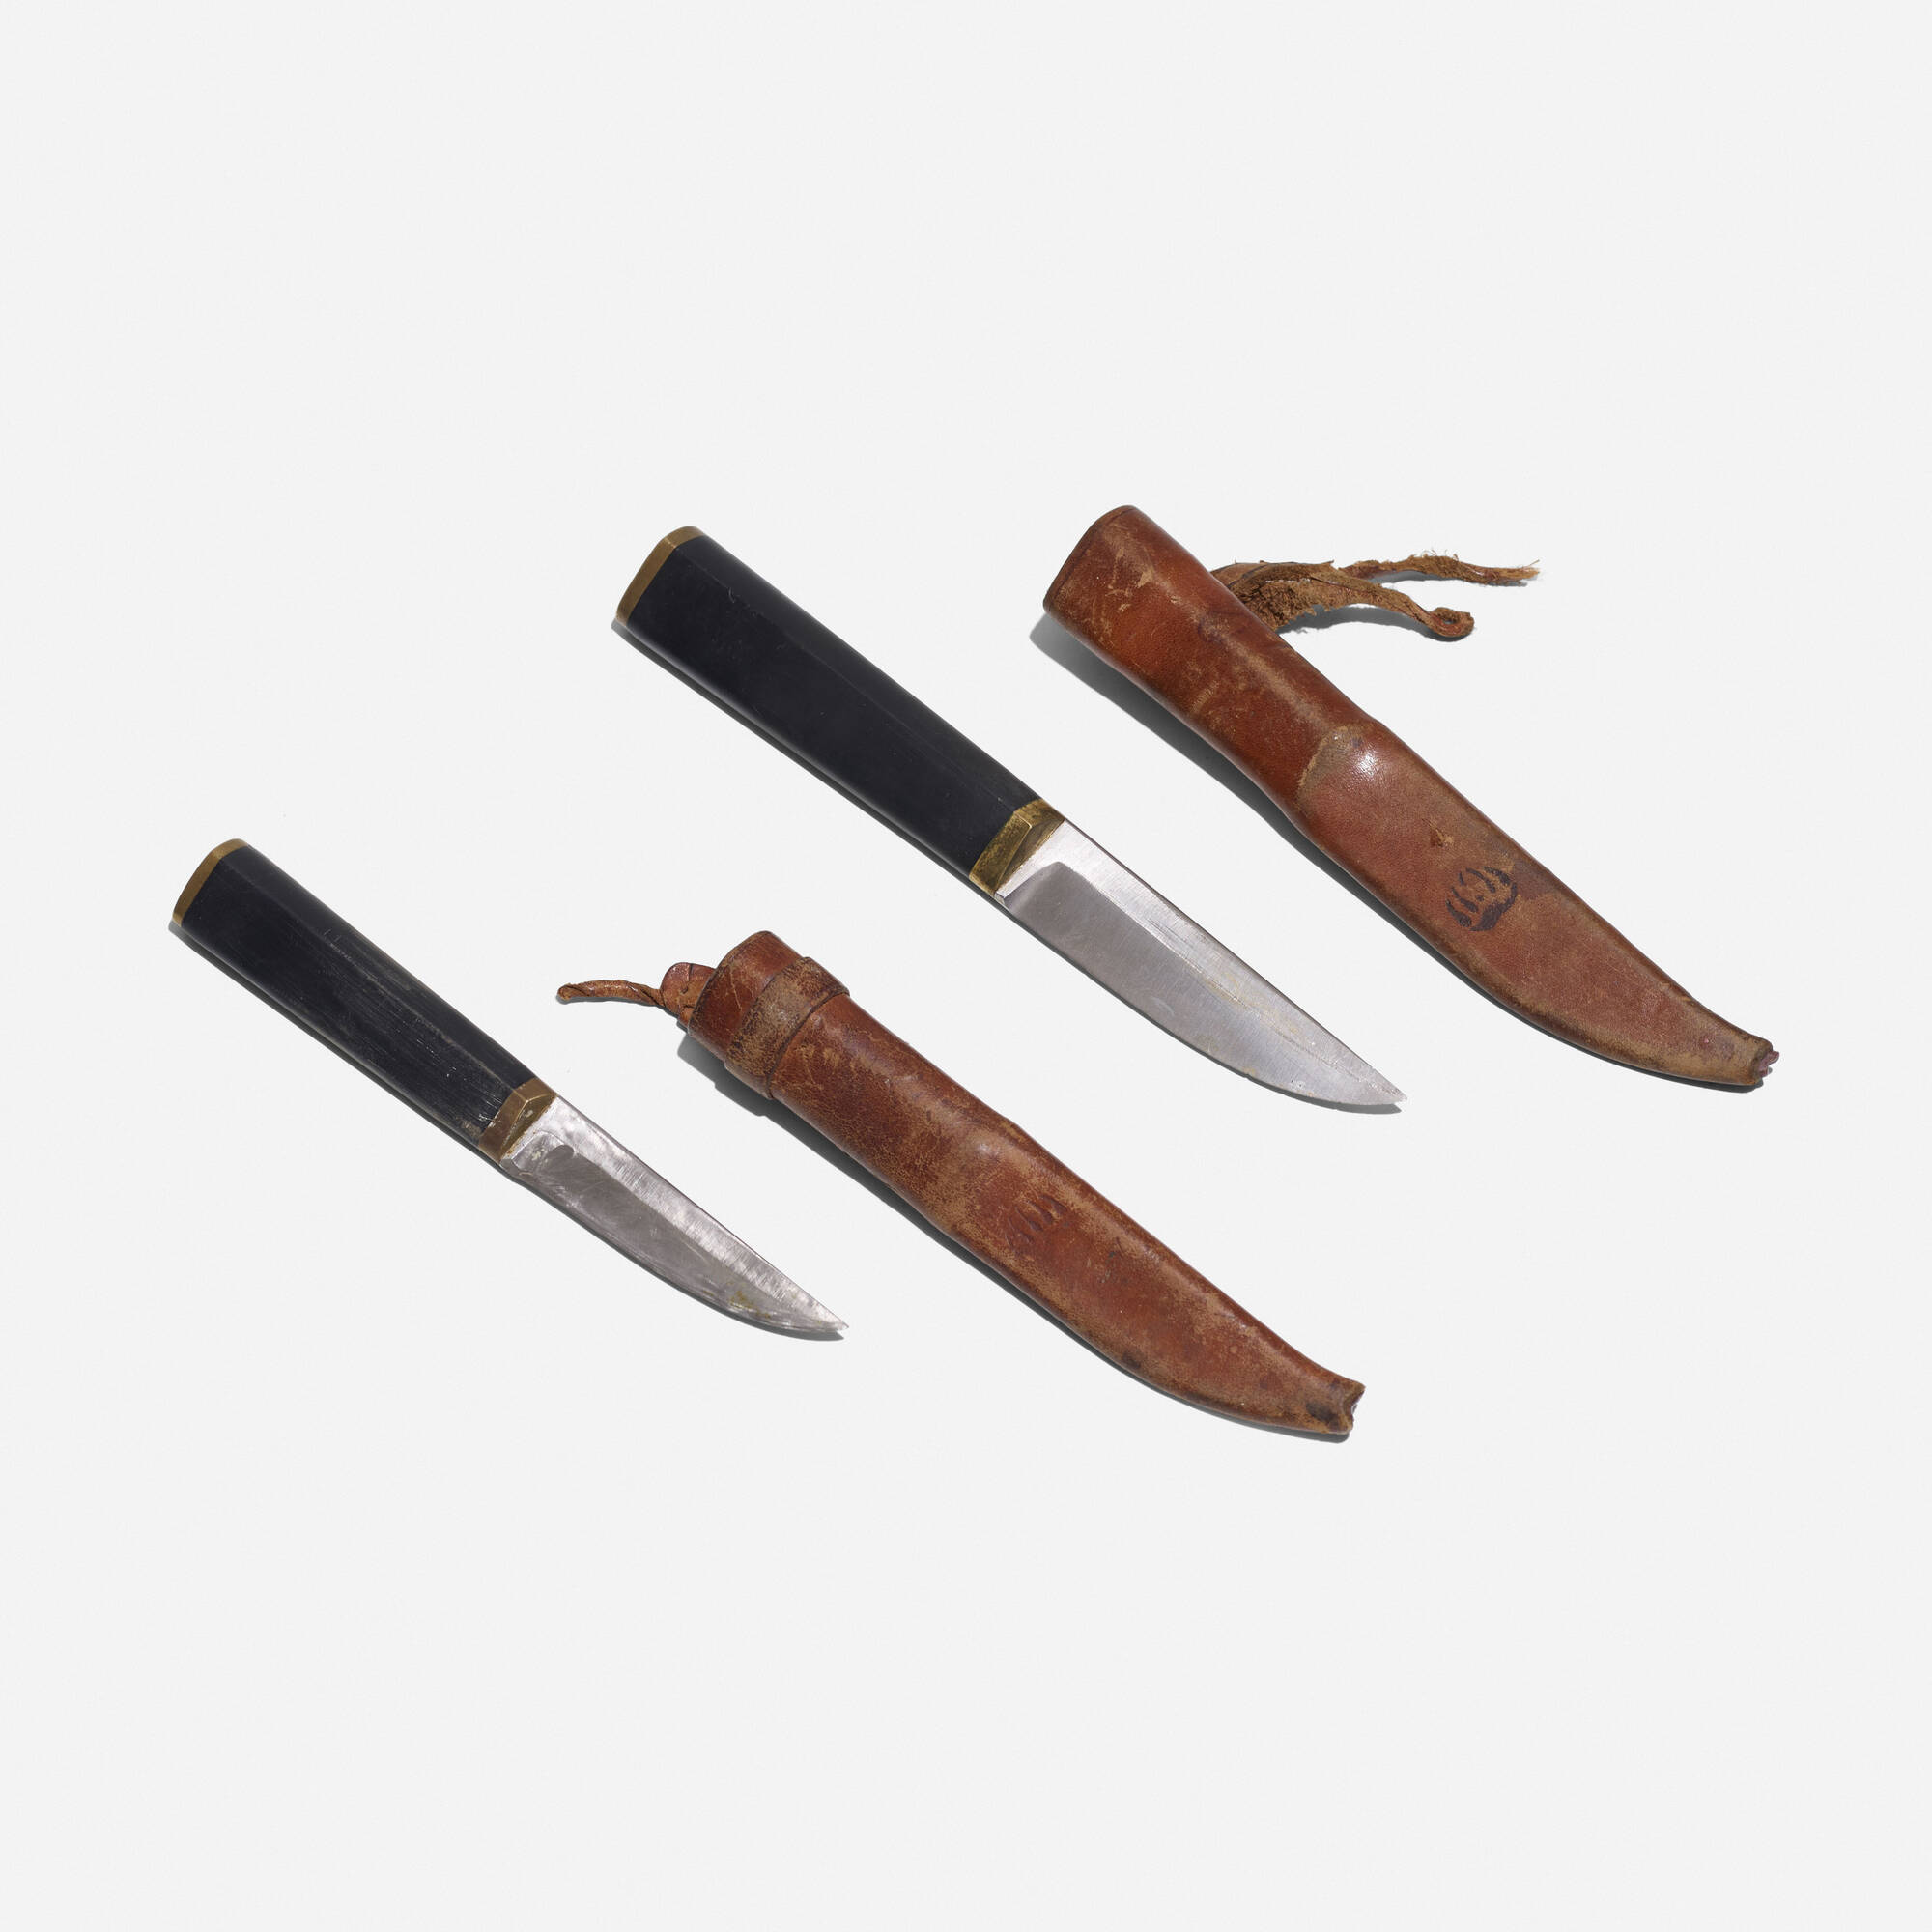 341: TAPIO WIRKKALA, Puukko knives and sheaths, set of two < Scandinavian  Design, 23 November 2021 < Auctions | Wright: Auctions of Art and Design